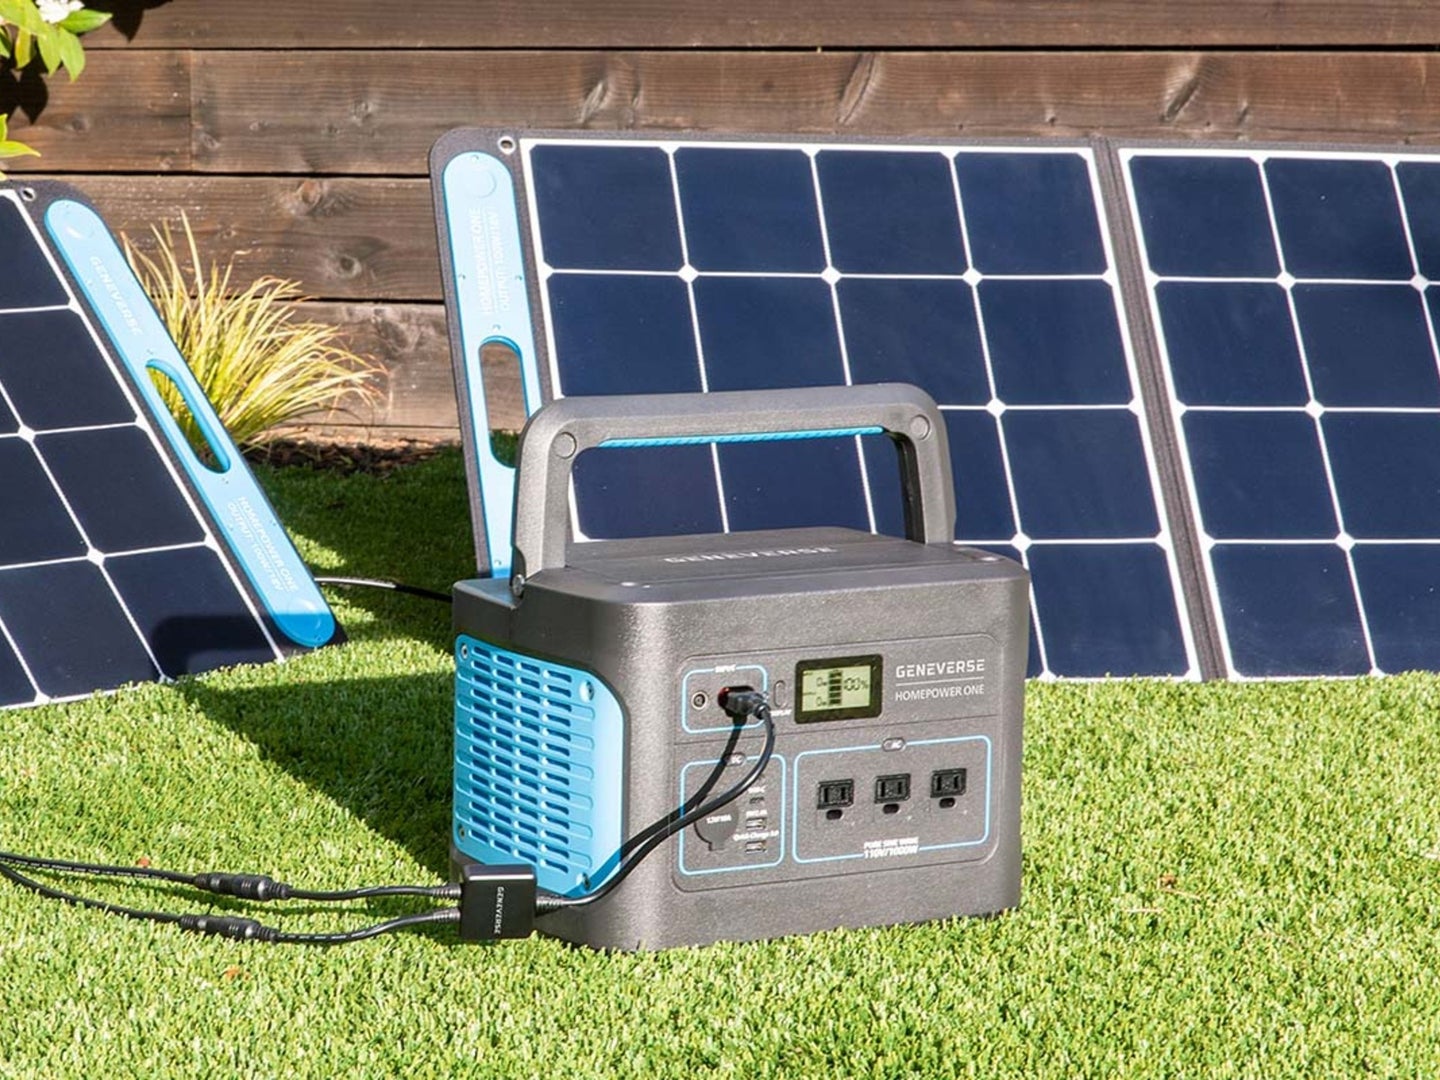 A solar generator on a patch of grass being powered by solar panels